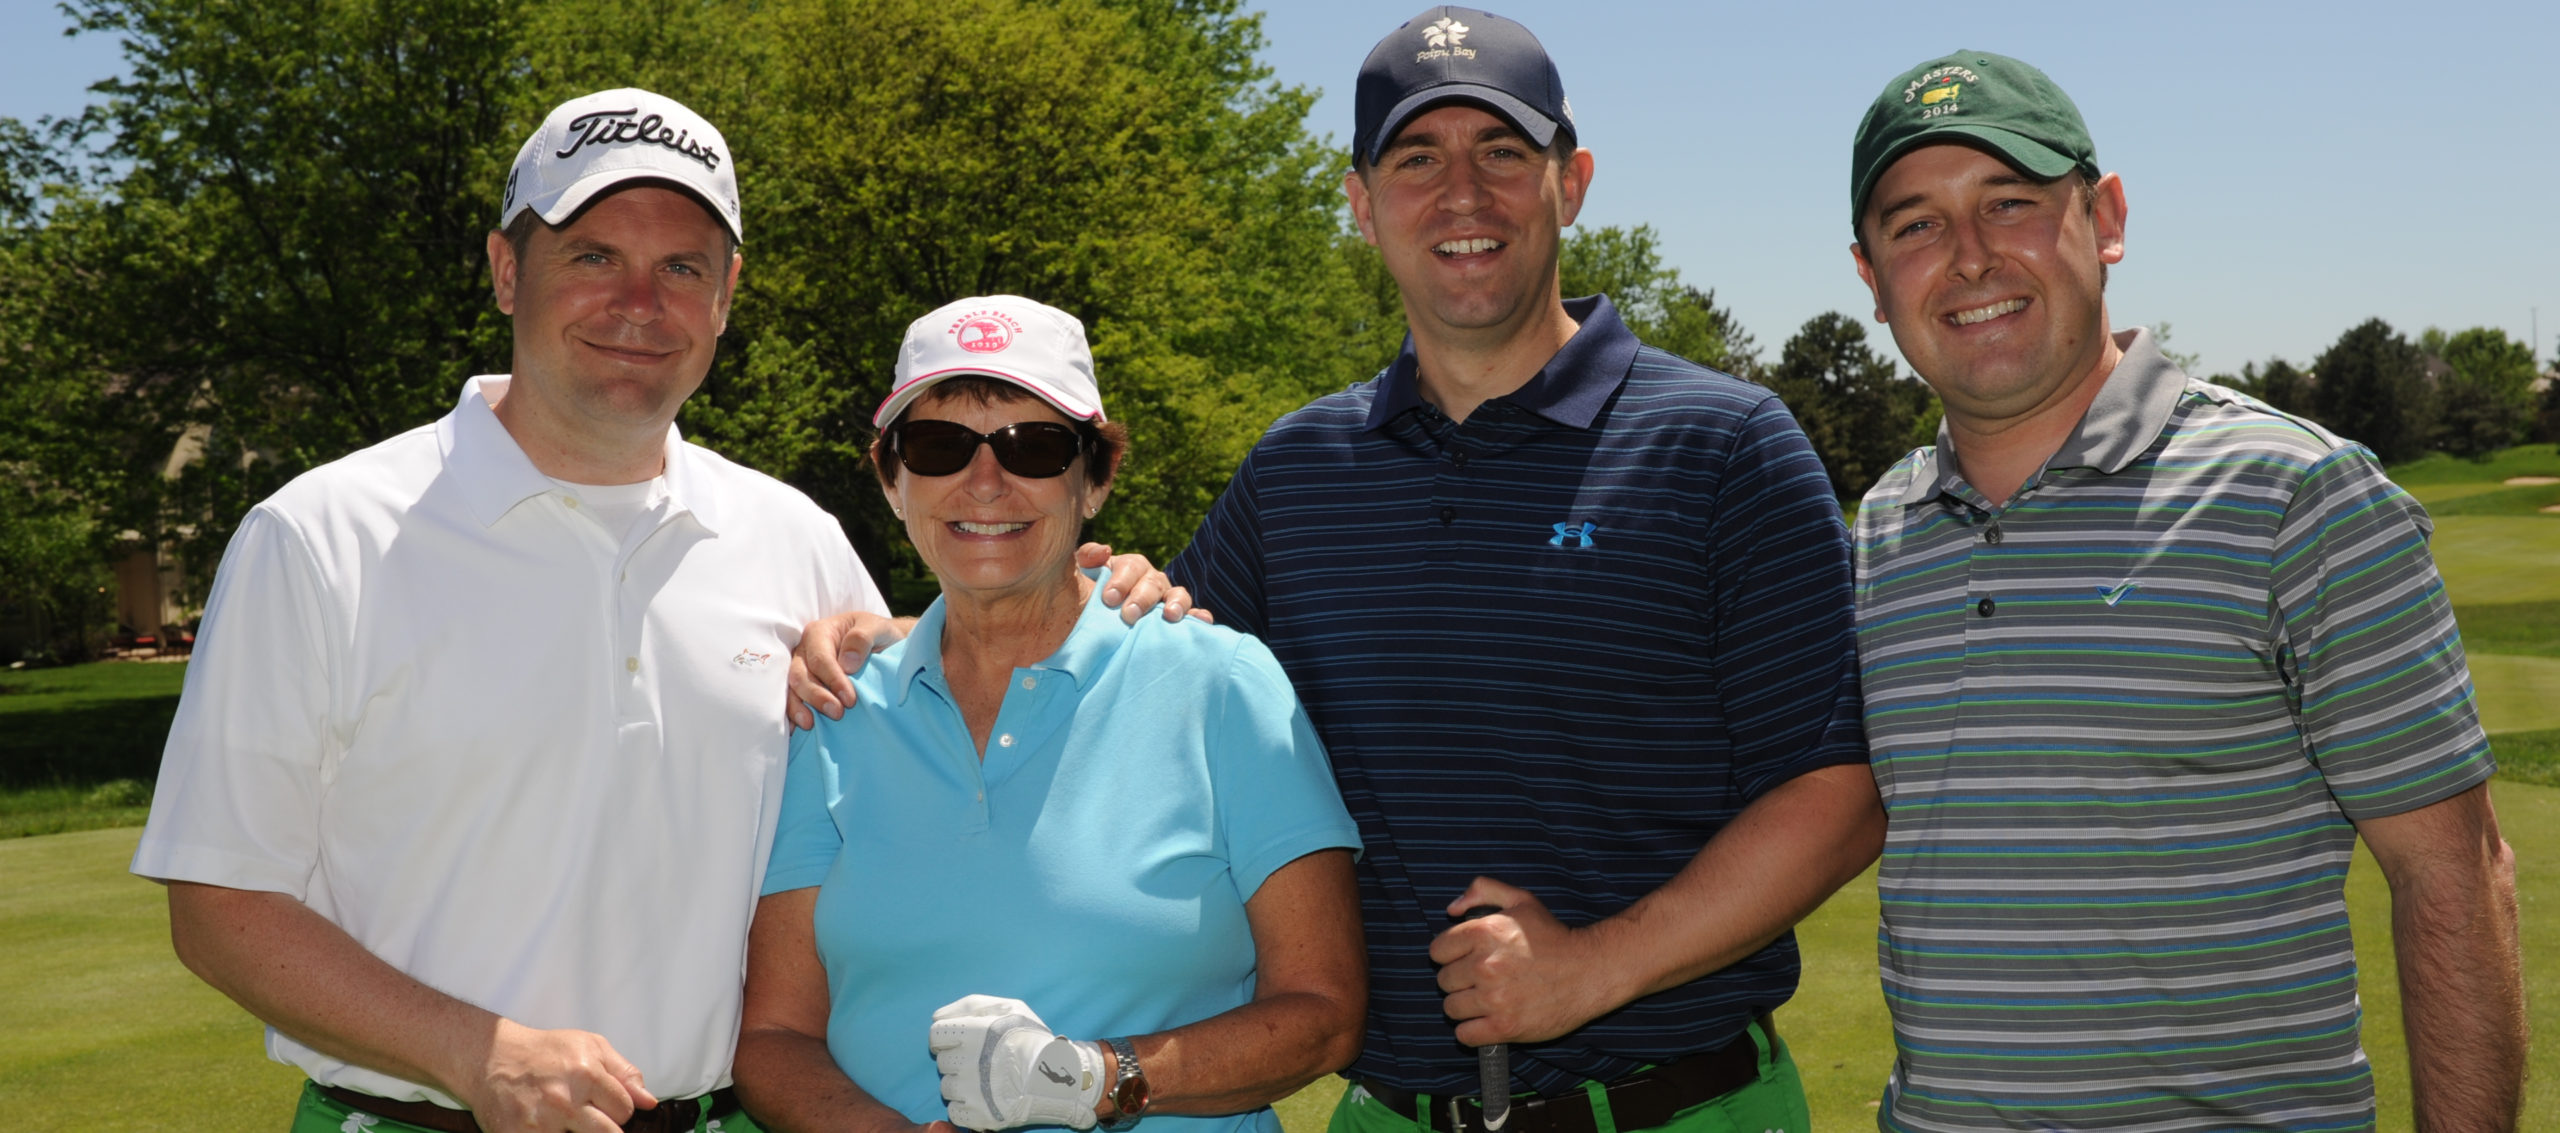 St. Patrick’s hosts two major annual fundraisers: in May, the Annual St. Patrick’s Residence Benefit Golf Outing.